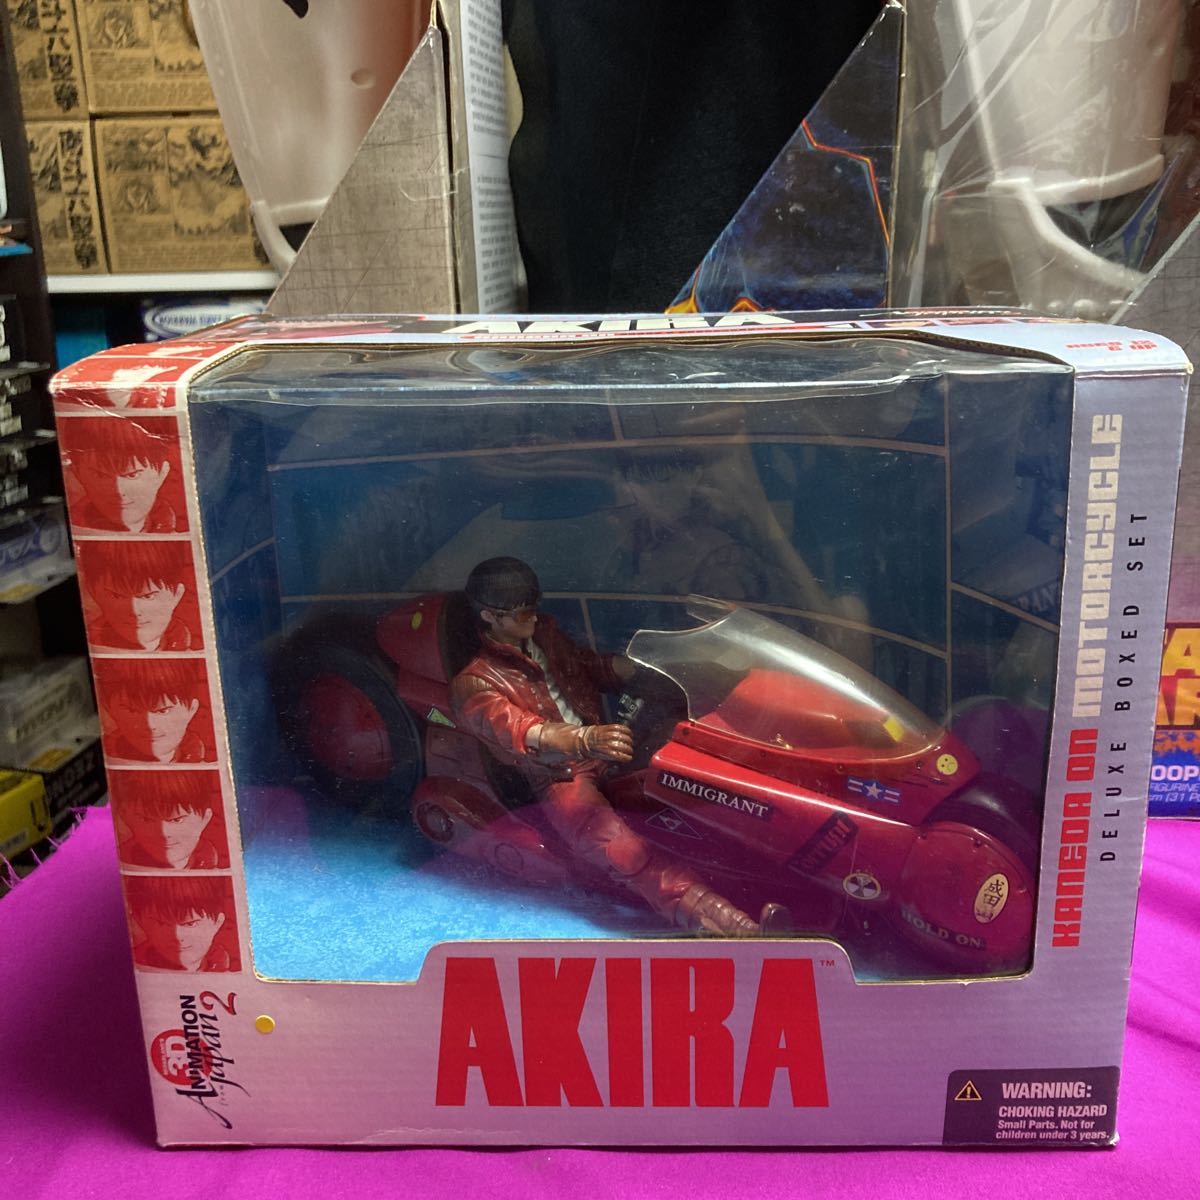 rqoo 金田 バイク アキラ AKIRA マクファーレントイズ 3D ANIMATION from japan 2 DELUXE BOXED SET